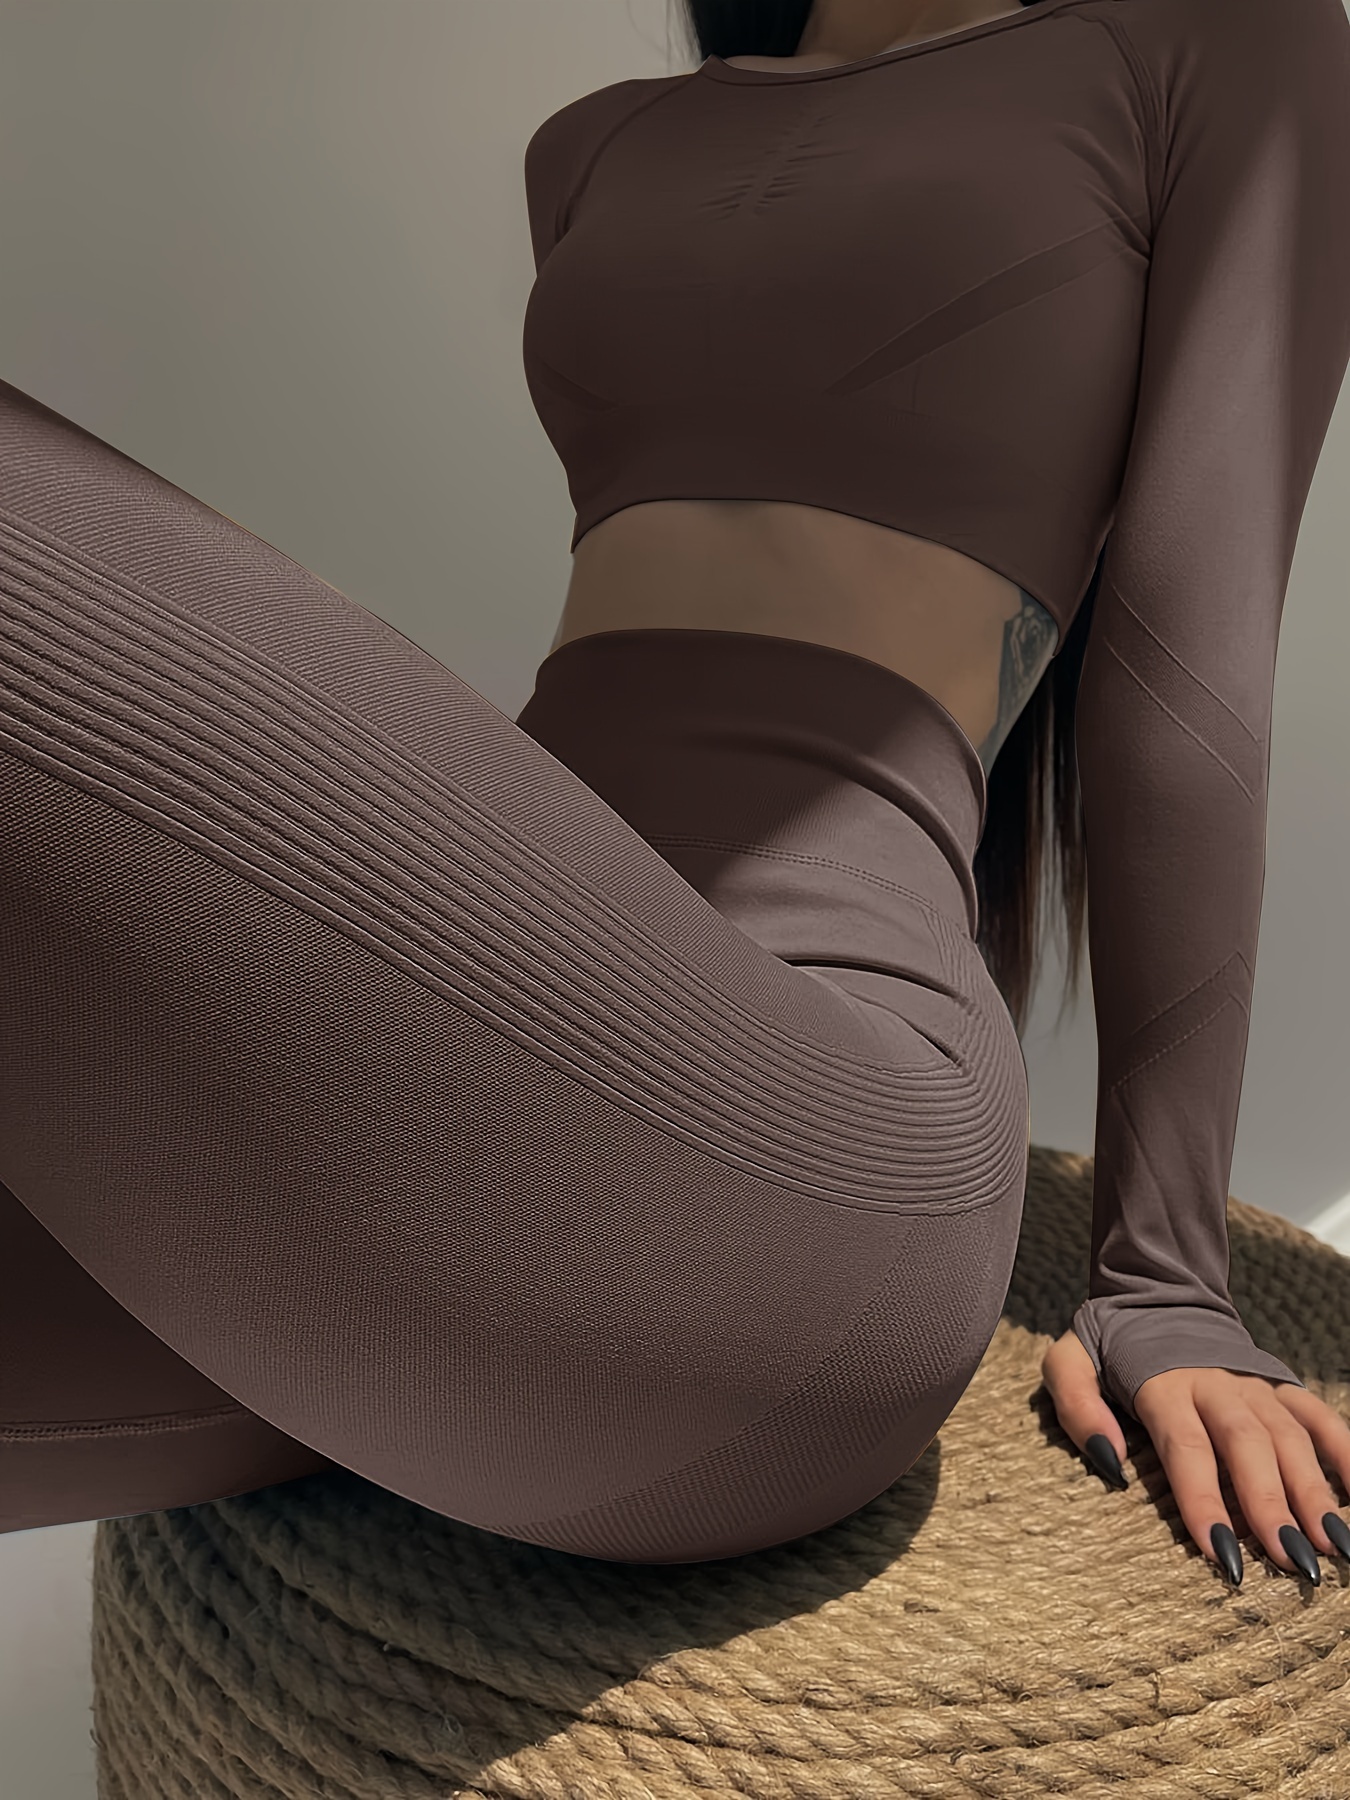 People Say These Scrunch-Butt Leggings Are *Wildly* Flattering